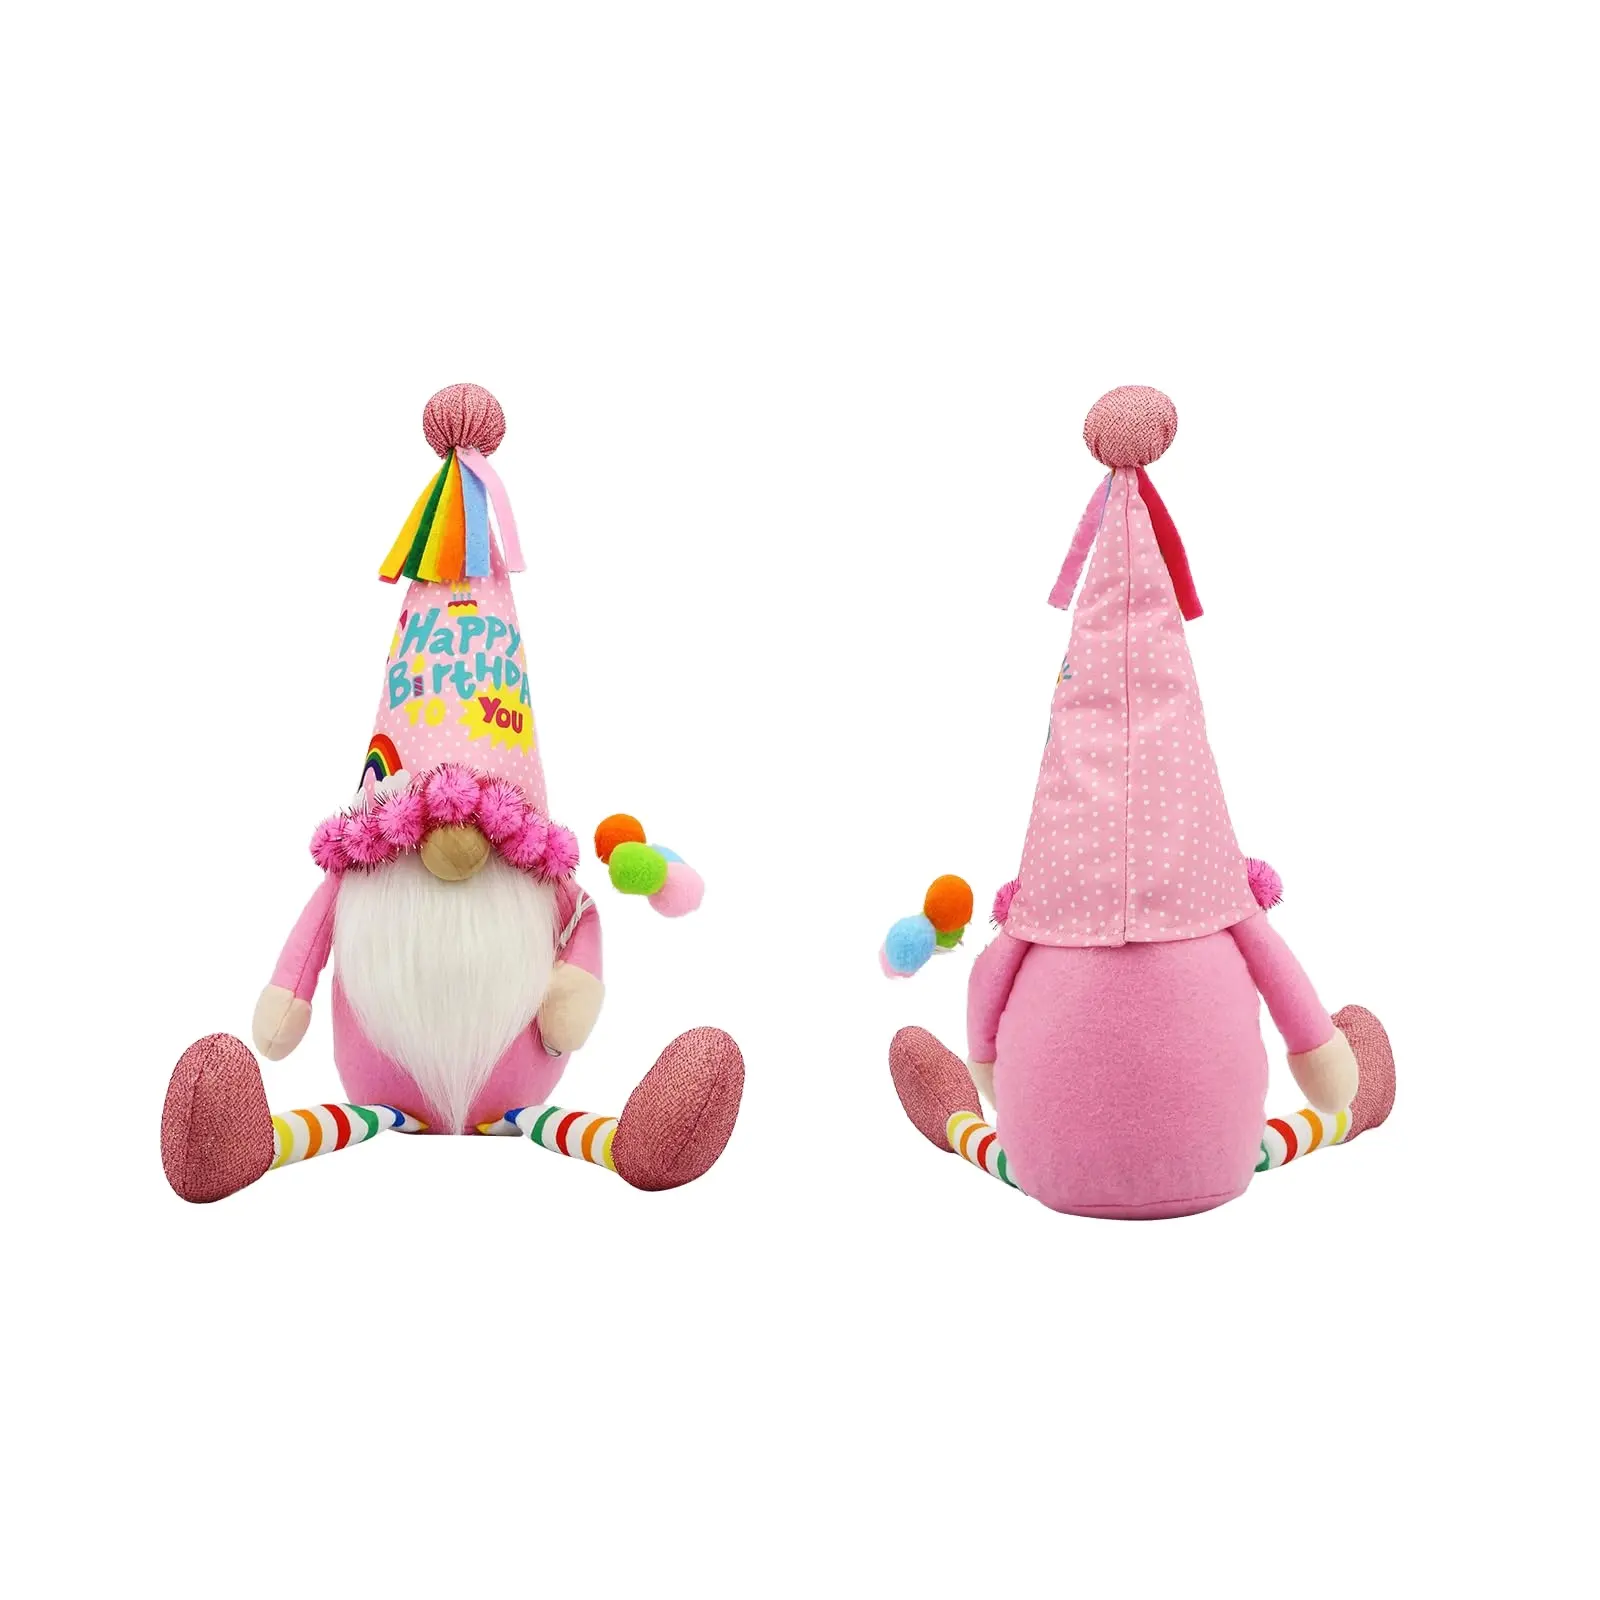 Pafu Happy Birthday Gifts for Women for Her Best Friends Happy Birthday Gift Ideas Birthday Decorations Funny Gnomes Gifts